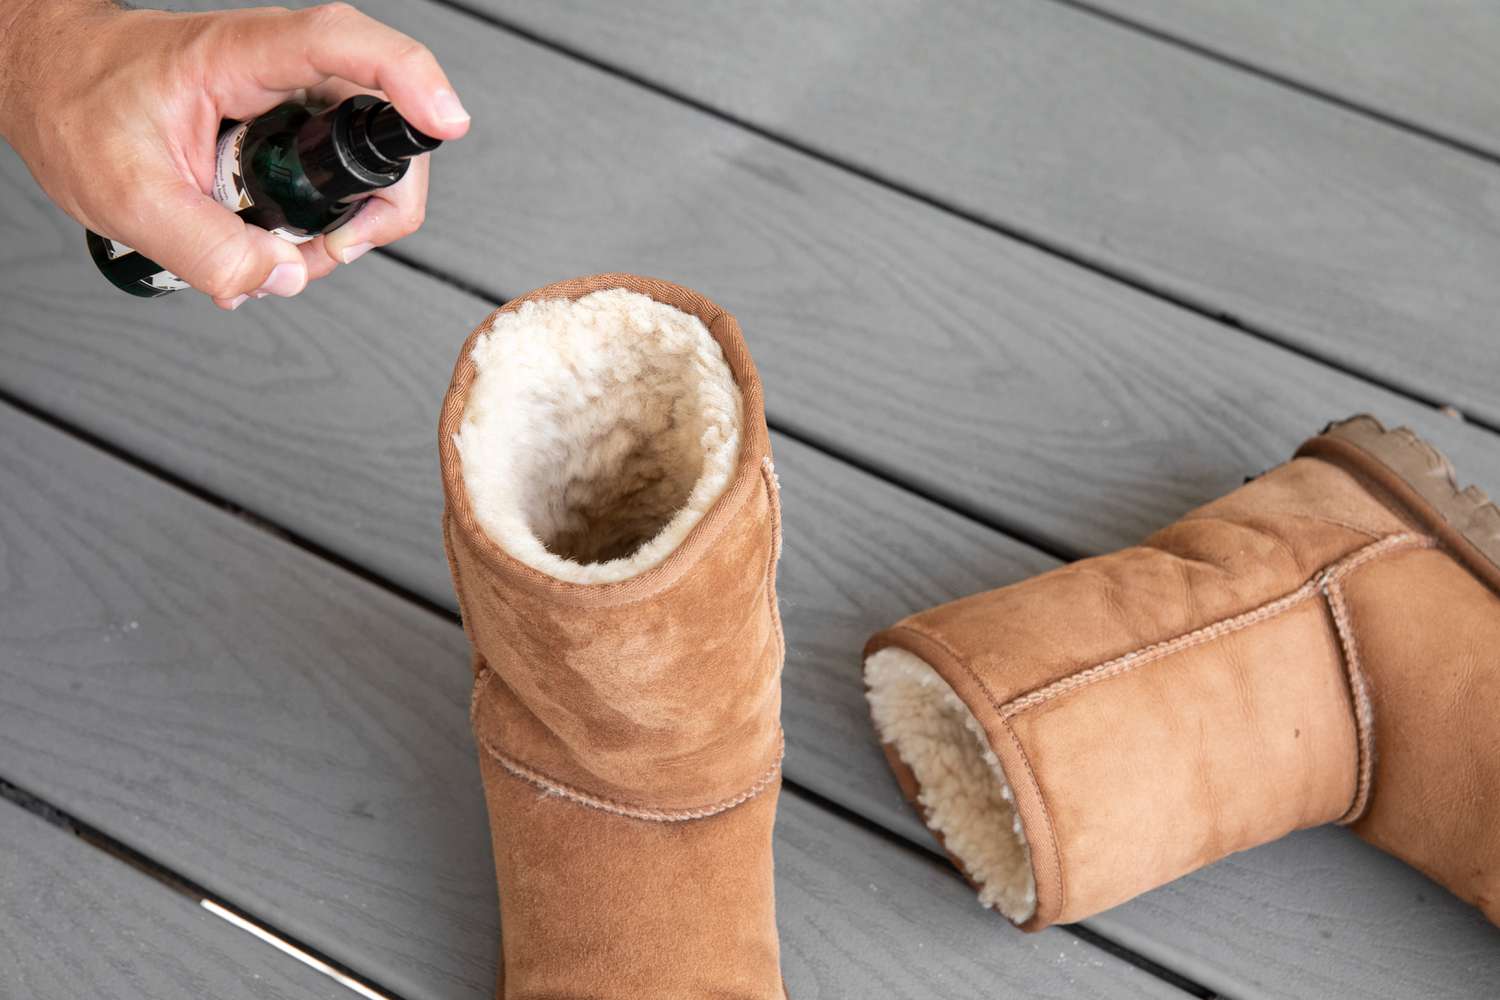 Someone using fungal spray inside an Ugg boot